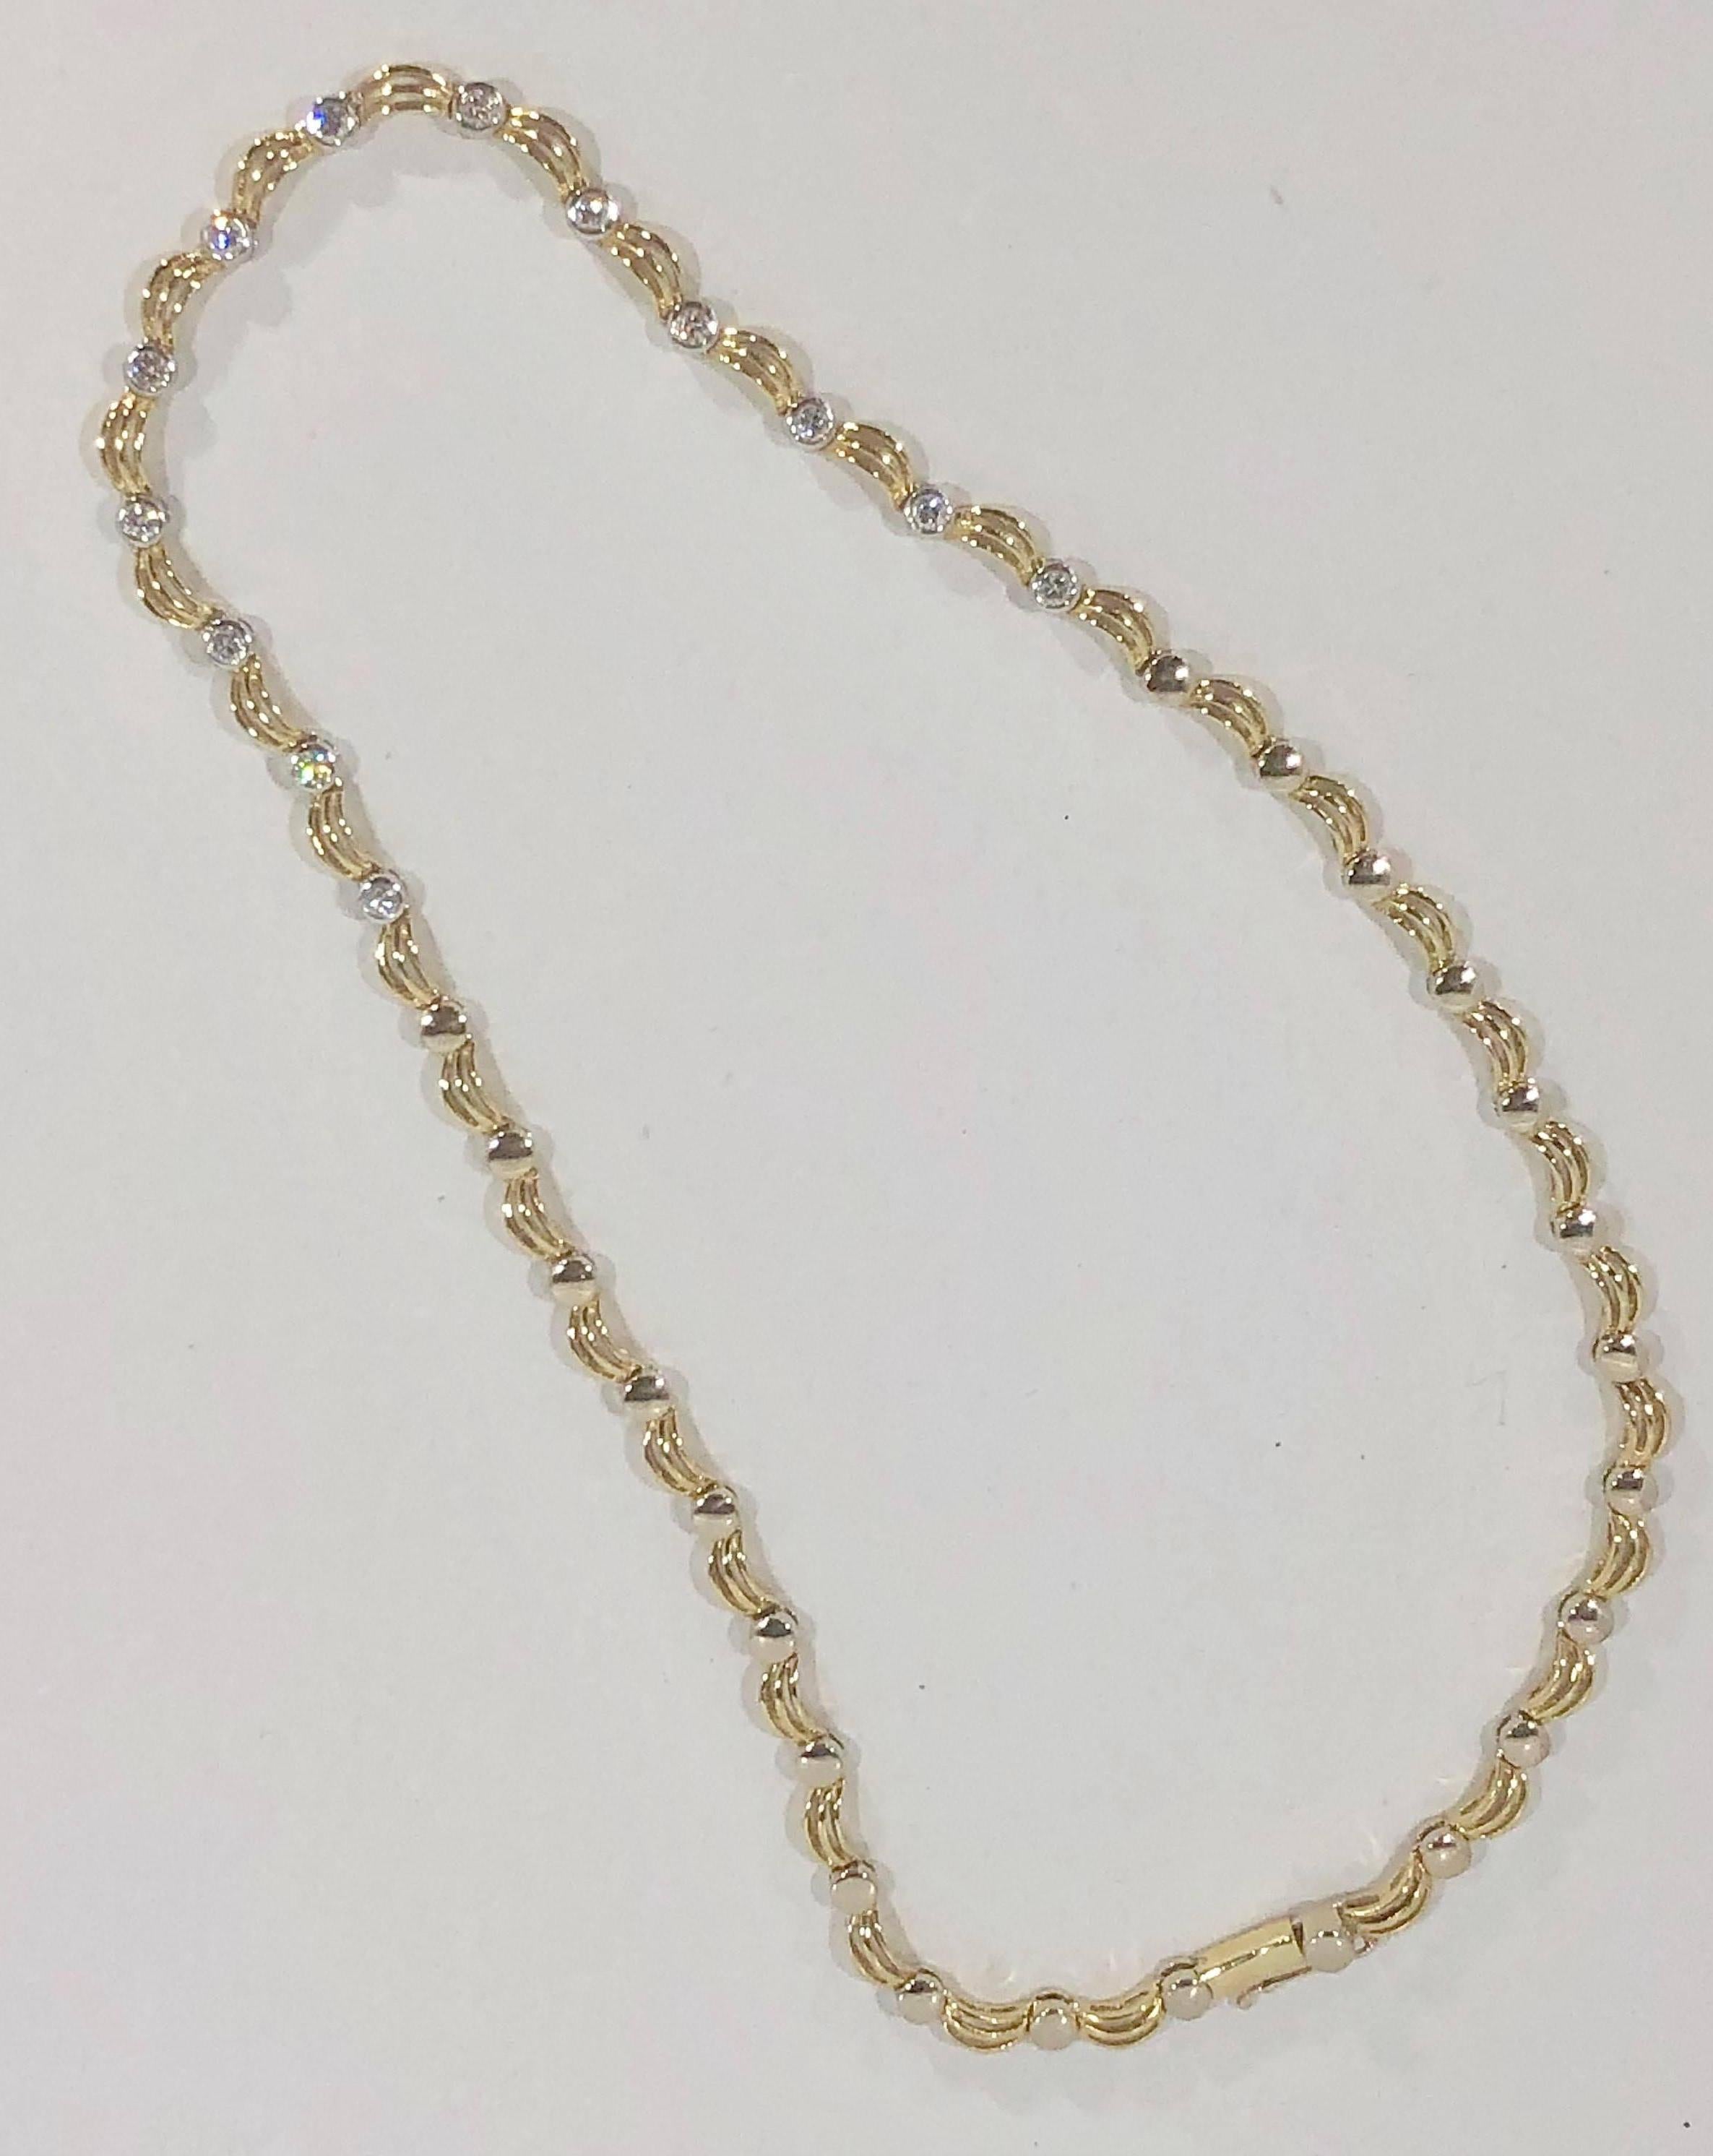 18 Karat Two-Tone Yellow/ White Gold and 1.0 Carat Diamond Fancy Link Necklace 5